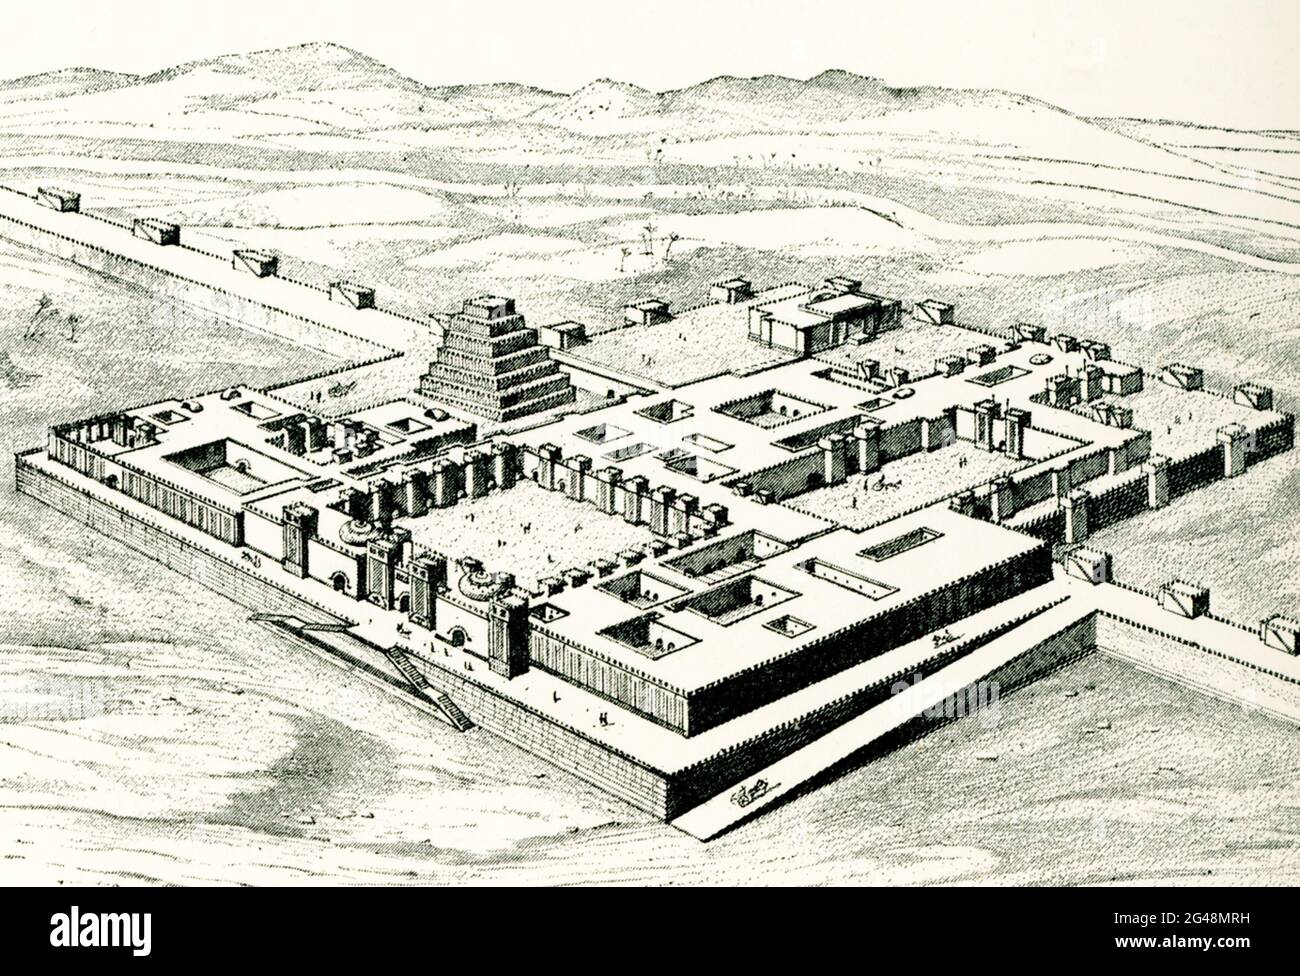 The 1904 caption for this image reads: “Bird's eye view of Sargon's Palace at Dur-Sharrukin drawn by Boudier from the restoration by Thomas in place.” Sargon's palace ( Dur Sharrukin) is an immediate predecessor of Sennasherib's Palace, with its Hanging Gardens, at Nineveh, to the south west of Khorsabad. The outer wall of the Sargon's fortress covered an area of three square kilometres and had seven fortified gates. Sargon II, (died 705 BCE), one of Assyria’s great kings (reigned 721–705 BCE) during the last century of its history. He extended and consolidated the conquests of his presumed fa Stock Photo